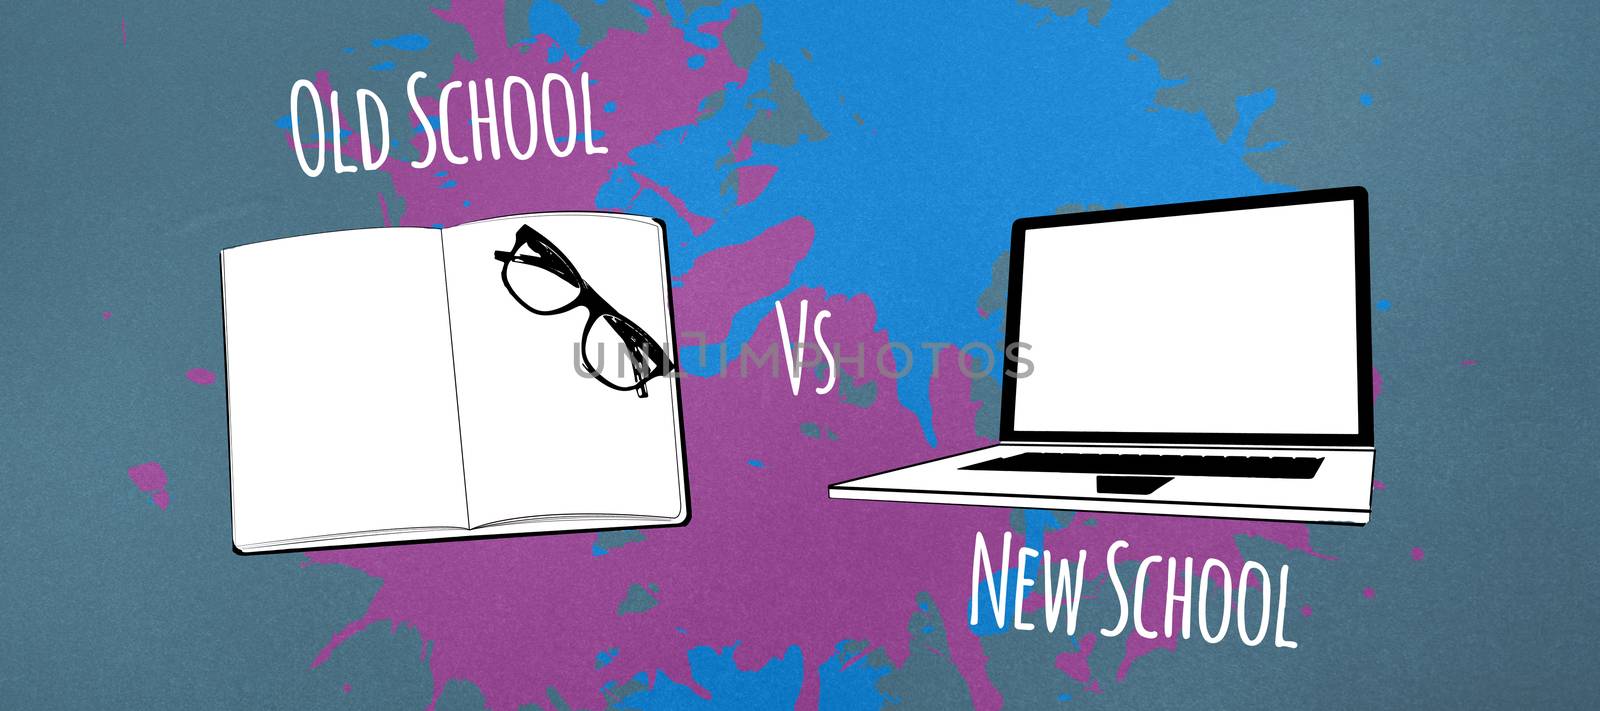 old school vs new school  against blue background